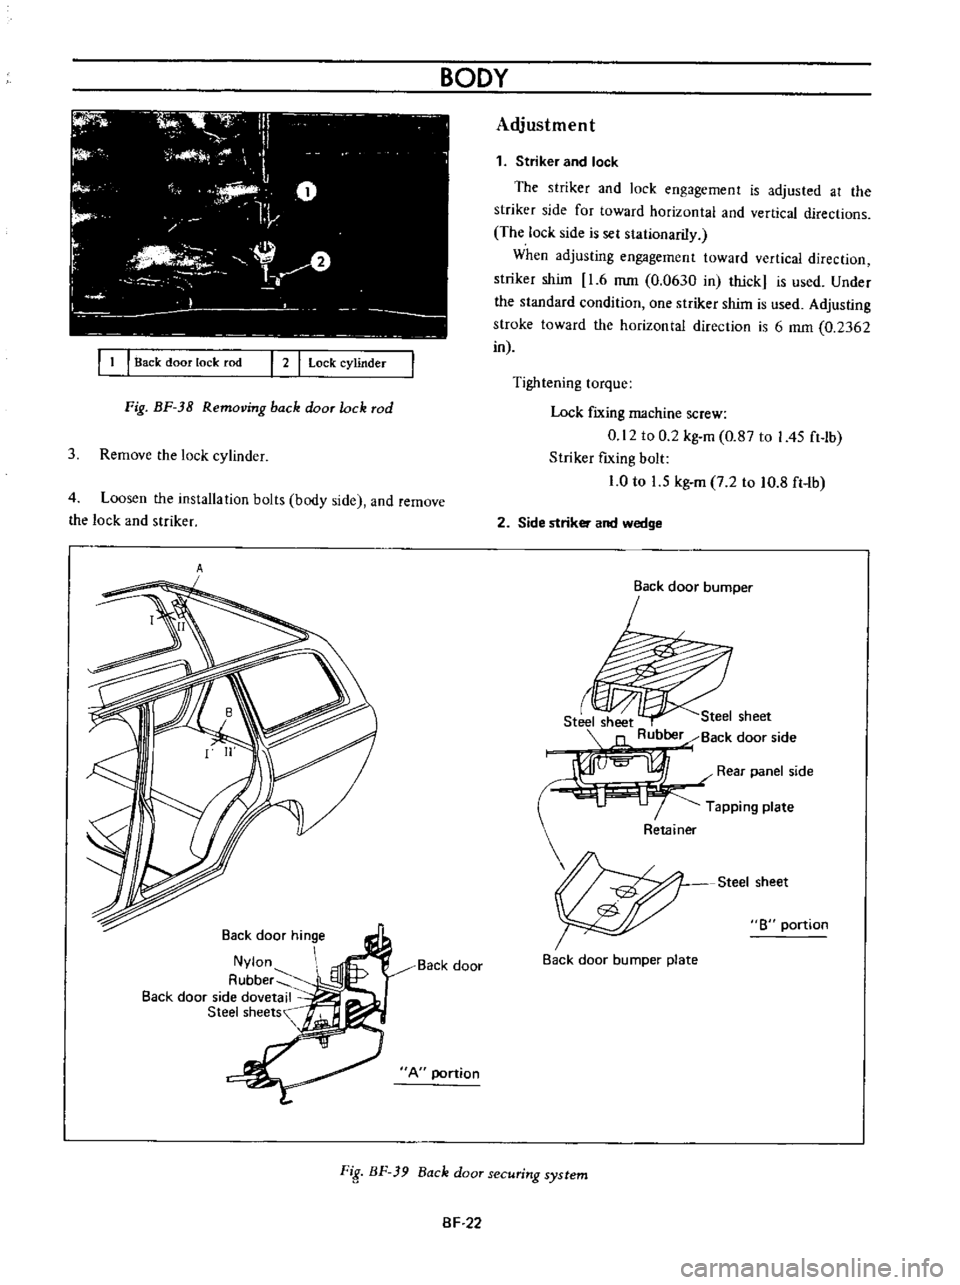 DATSUN B110 1973  Service Repair Manual 
I 
1

I 
Back

door 
lock 
rod

I 
2

I 
Lock

cylinder

Fig 
BF 
38

Removing 
back 
door 
lock

rod

3

Remove 
the

lock

cylinder

4

Loosen 
the

installation 
bolts

body 
side 
and

remove

th